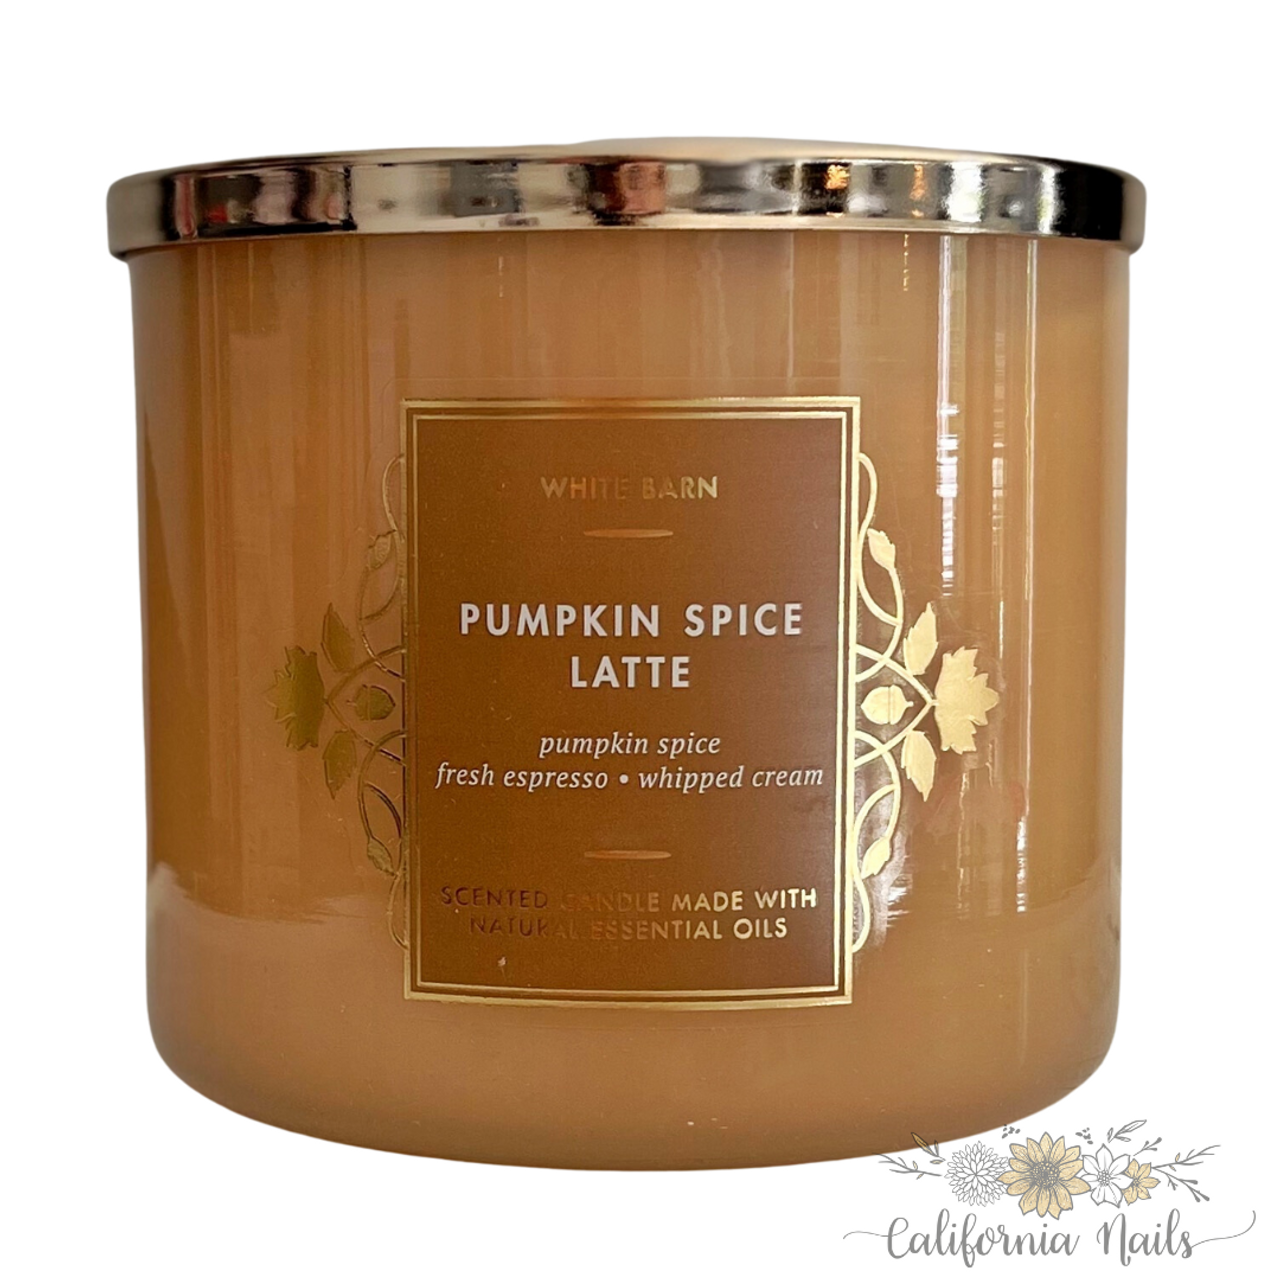 Christmas Spice 》Wood Wick Candle